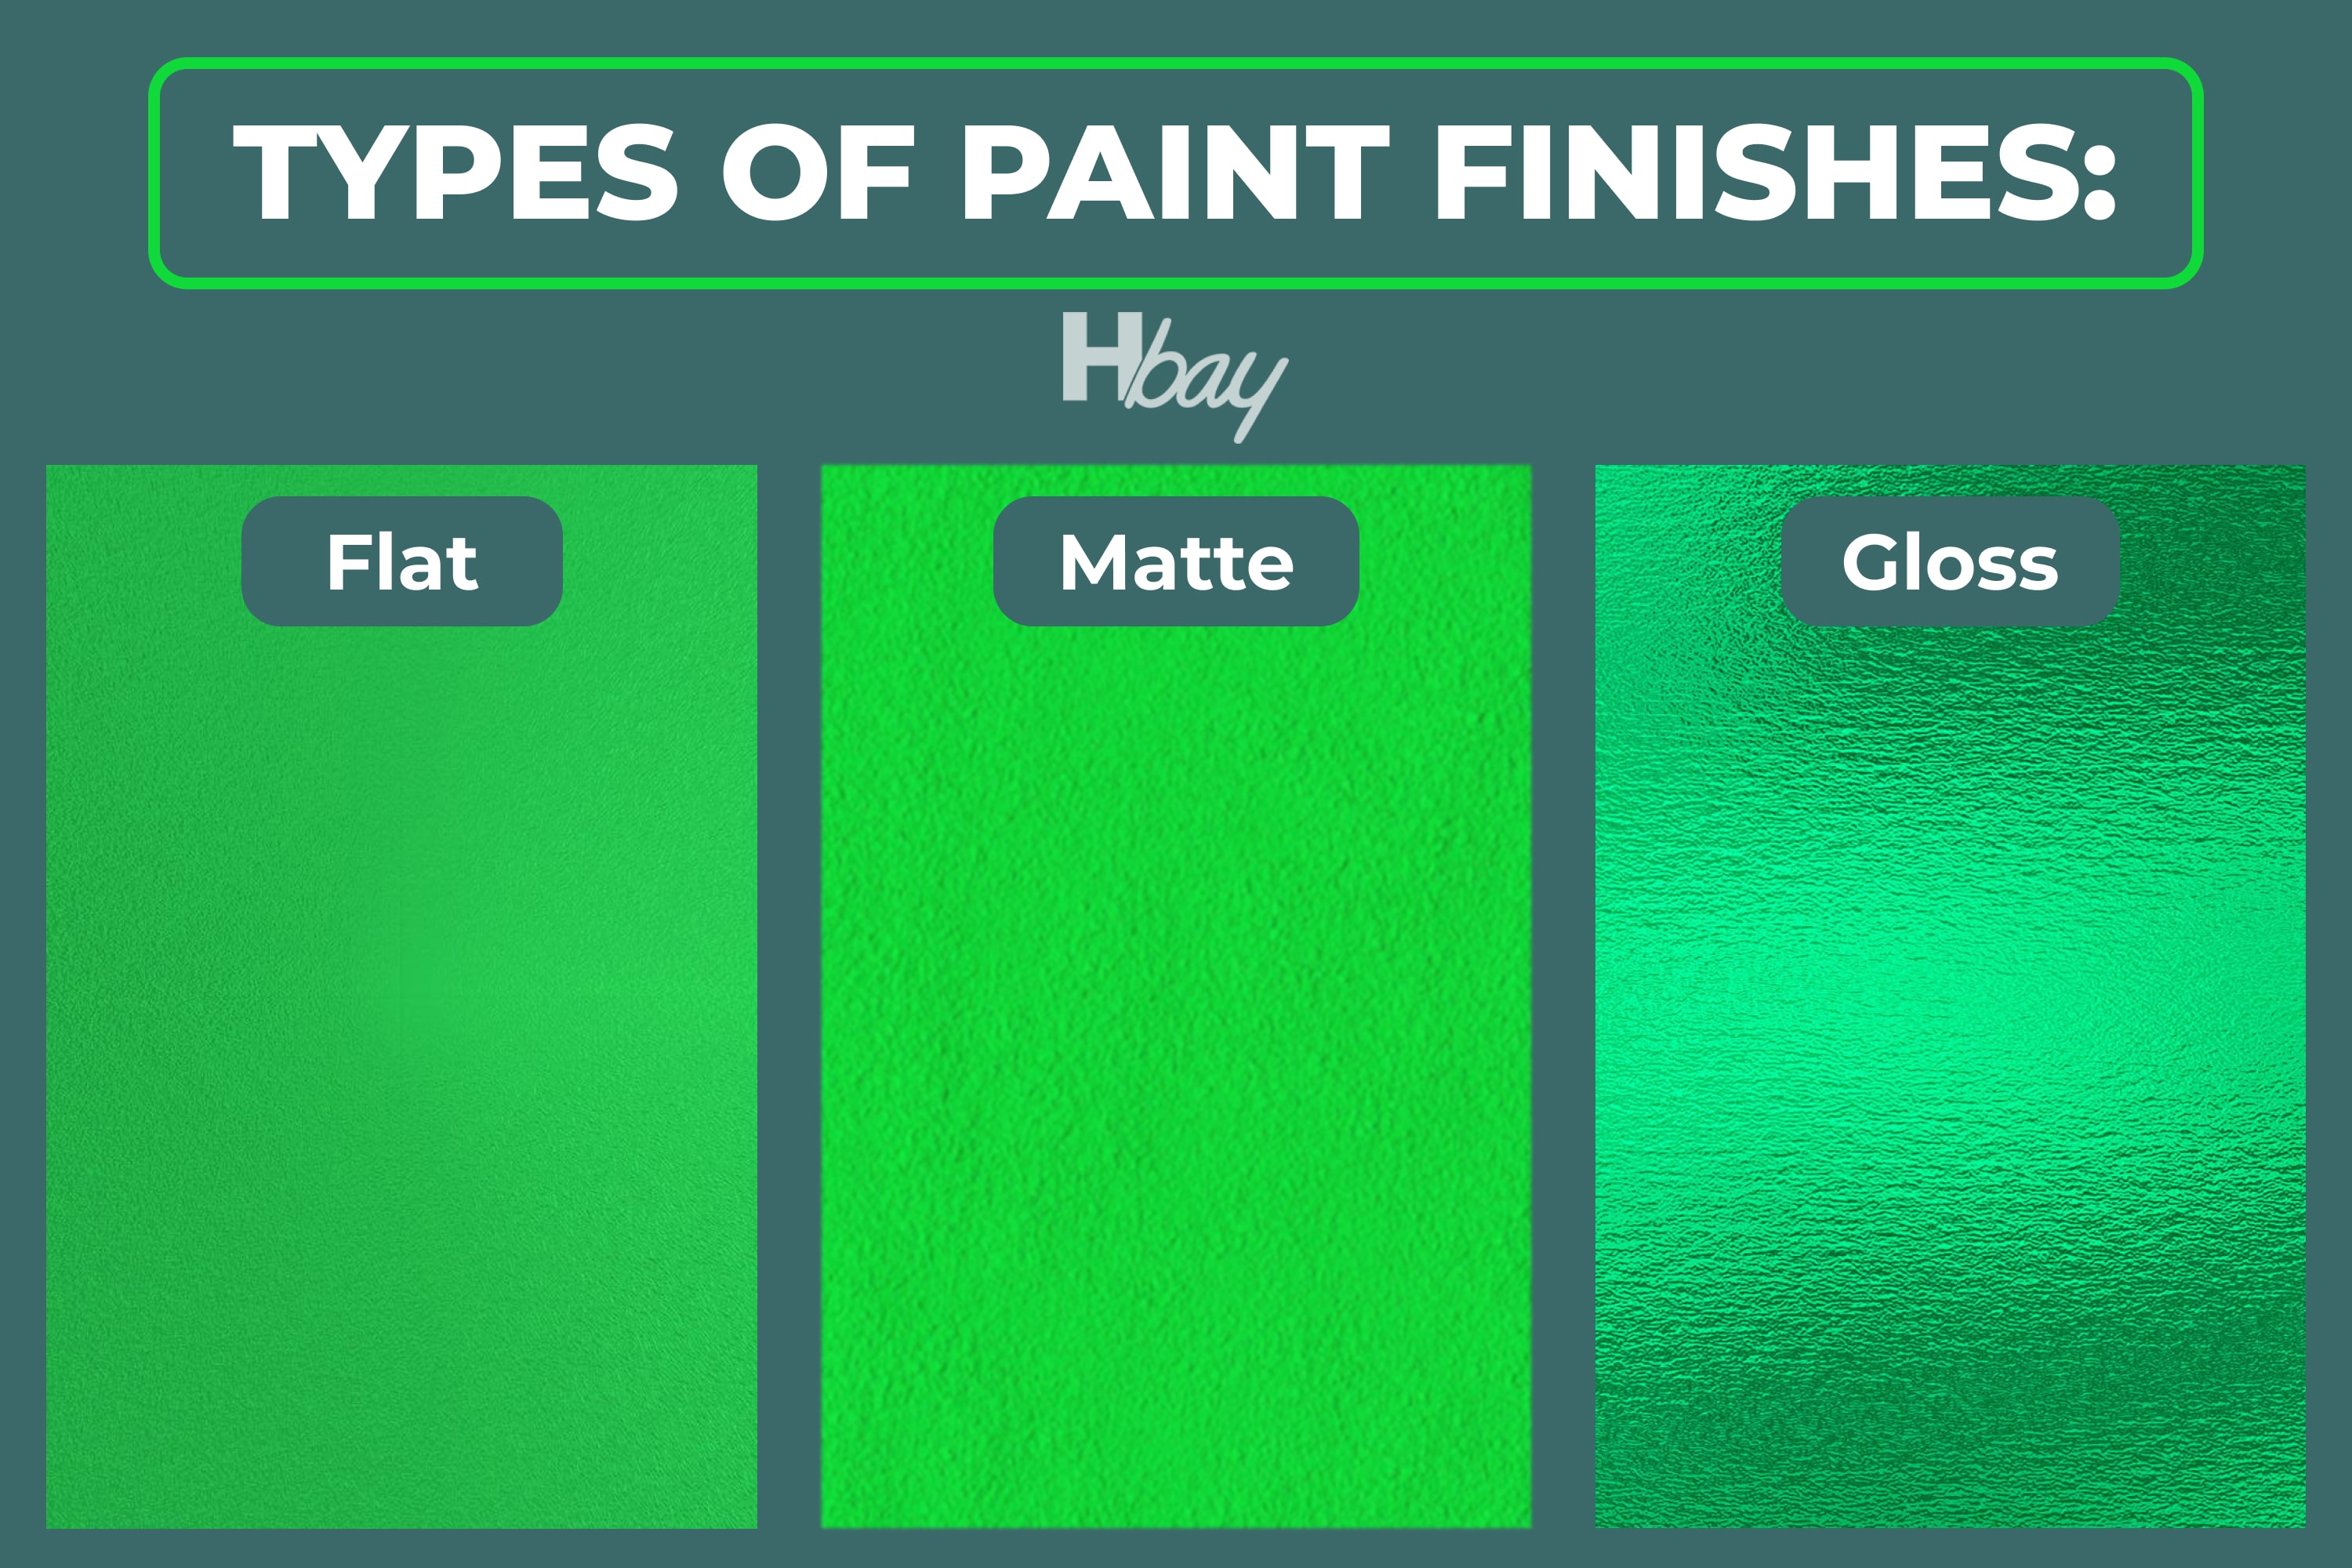 Types of paint finishes